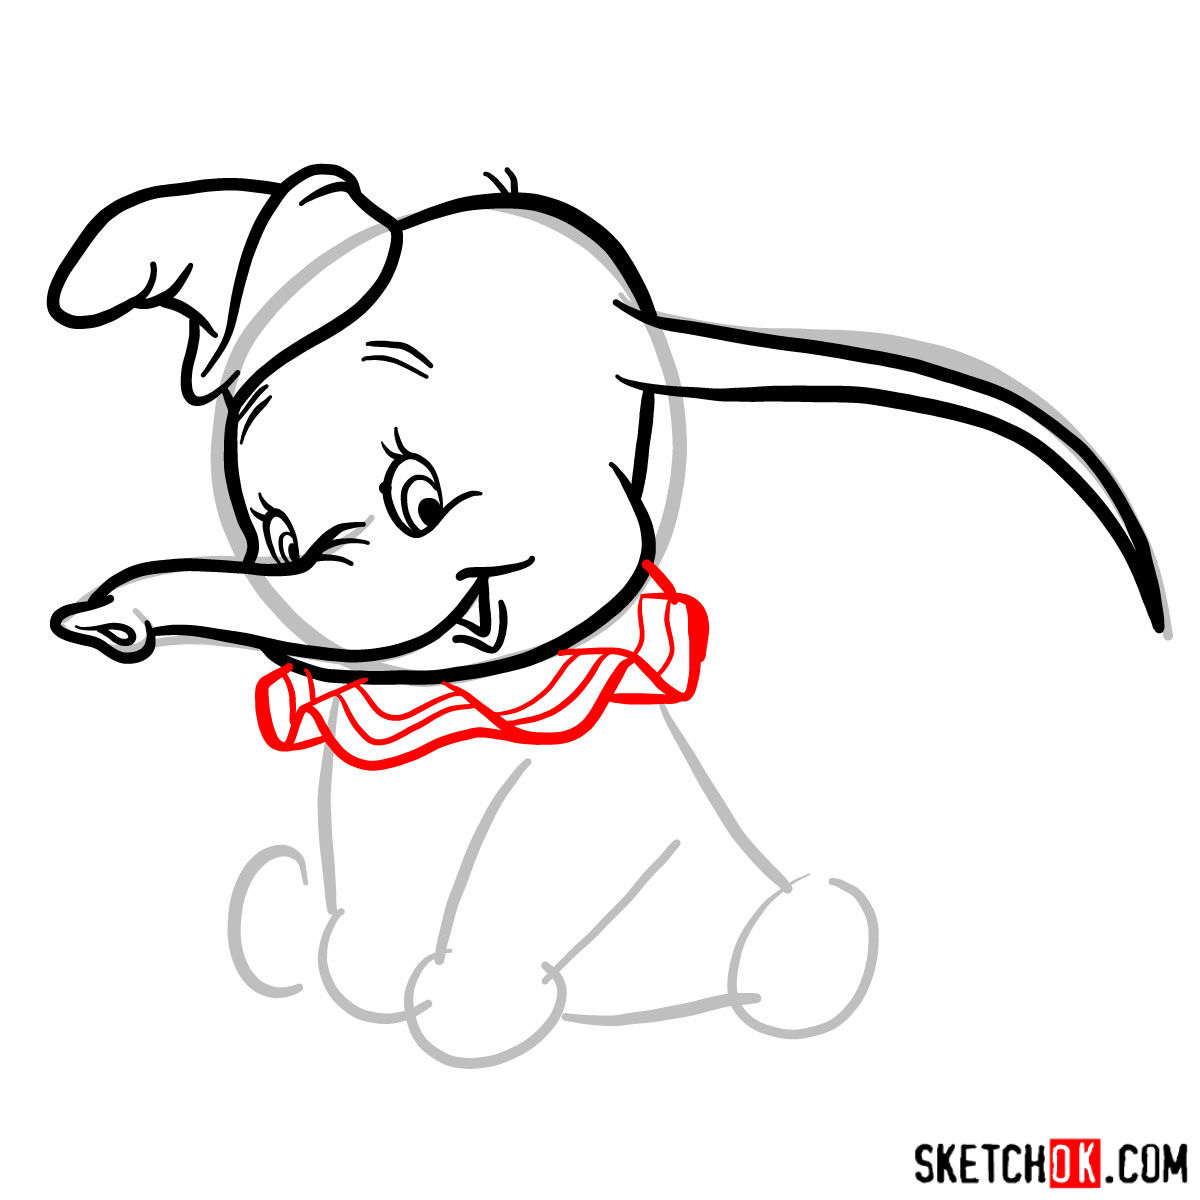 How to draw Dumbo the elephant - step 05